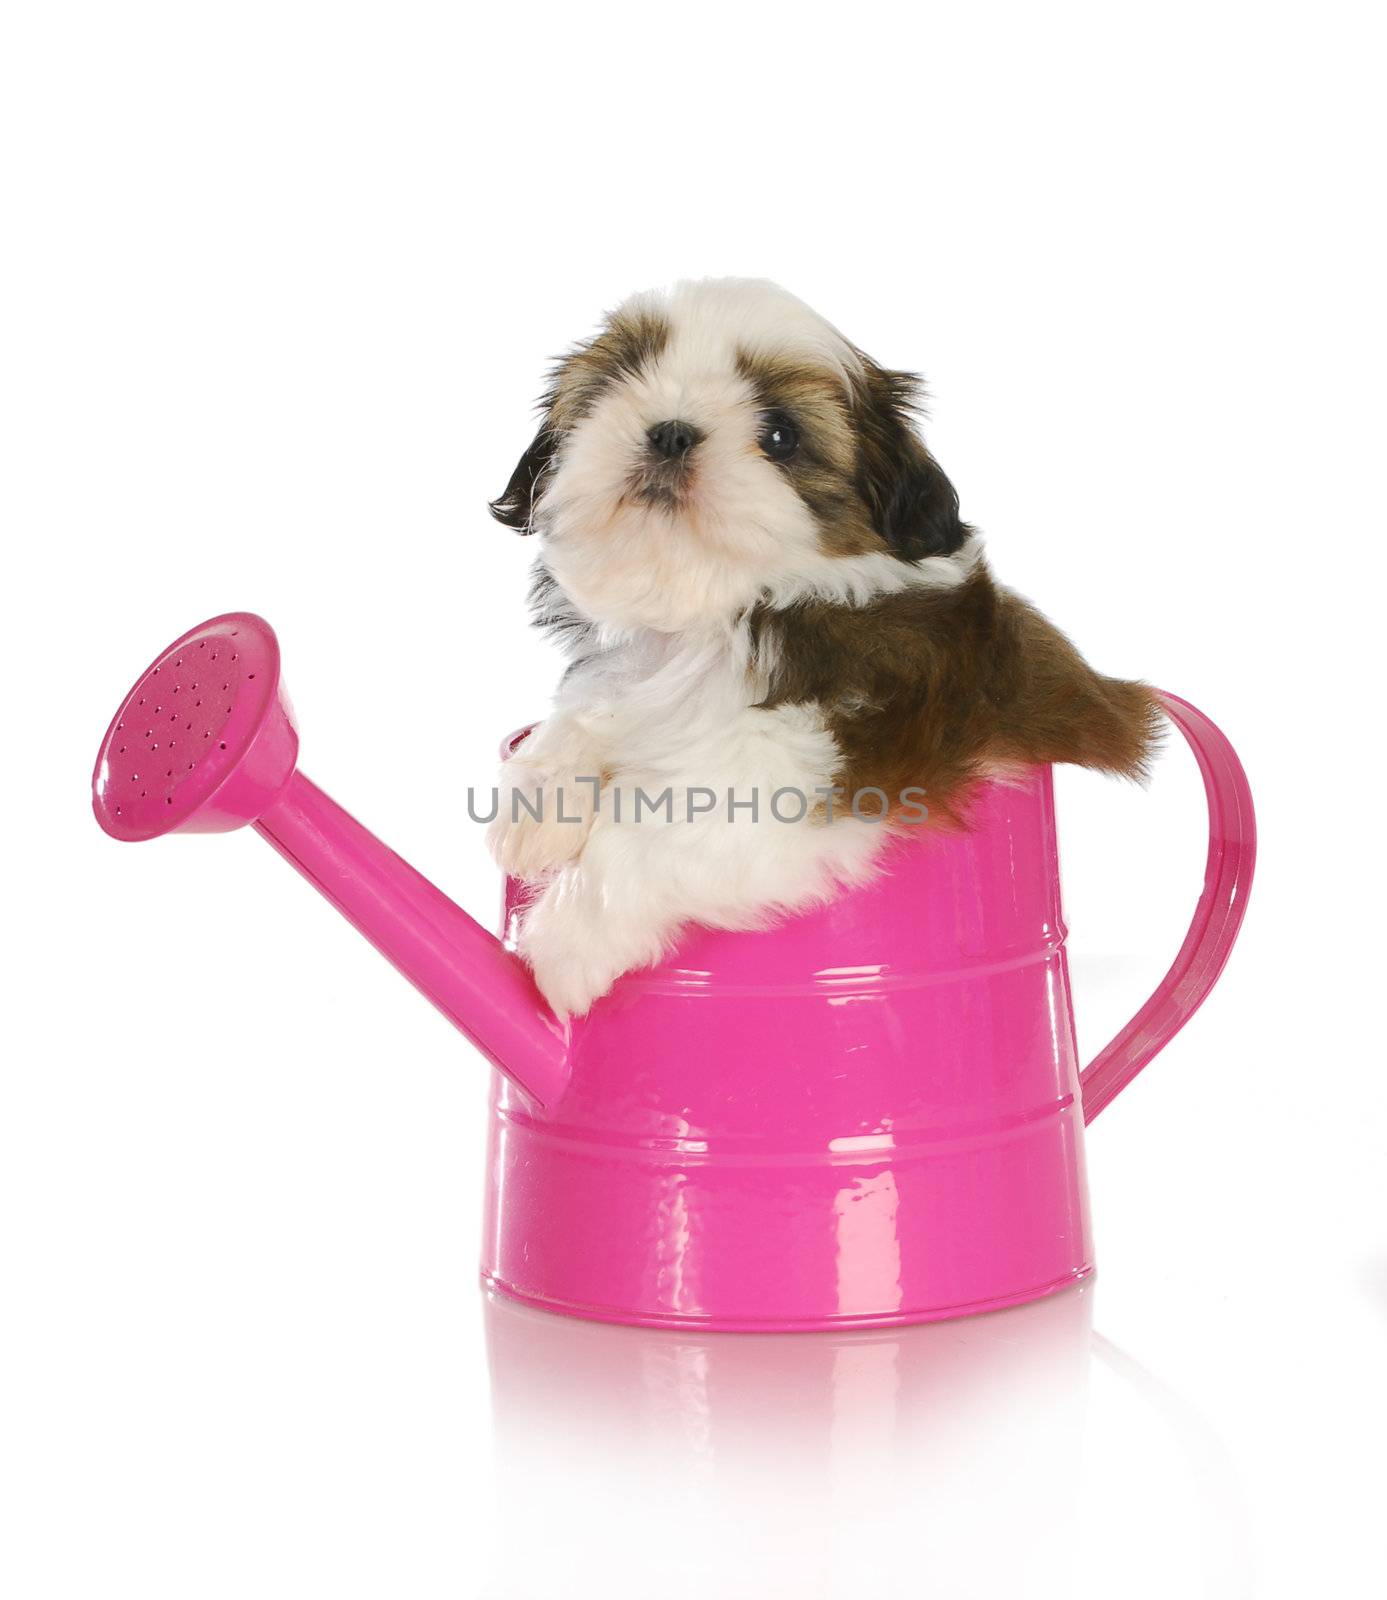 cute puppy in a pink watering can - shih tzu puppy - 6 weeks old